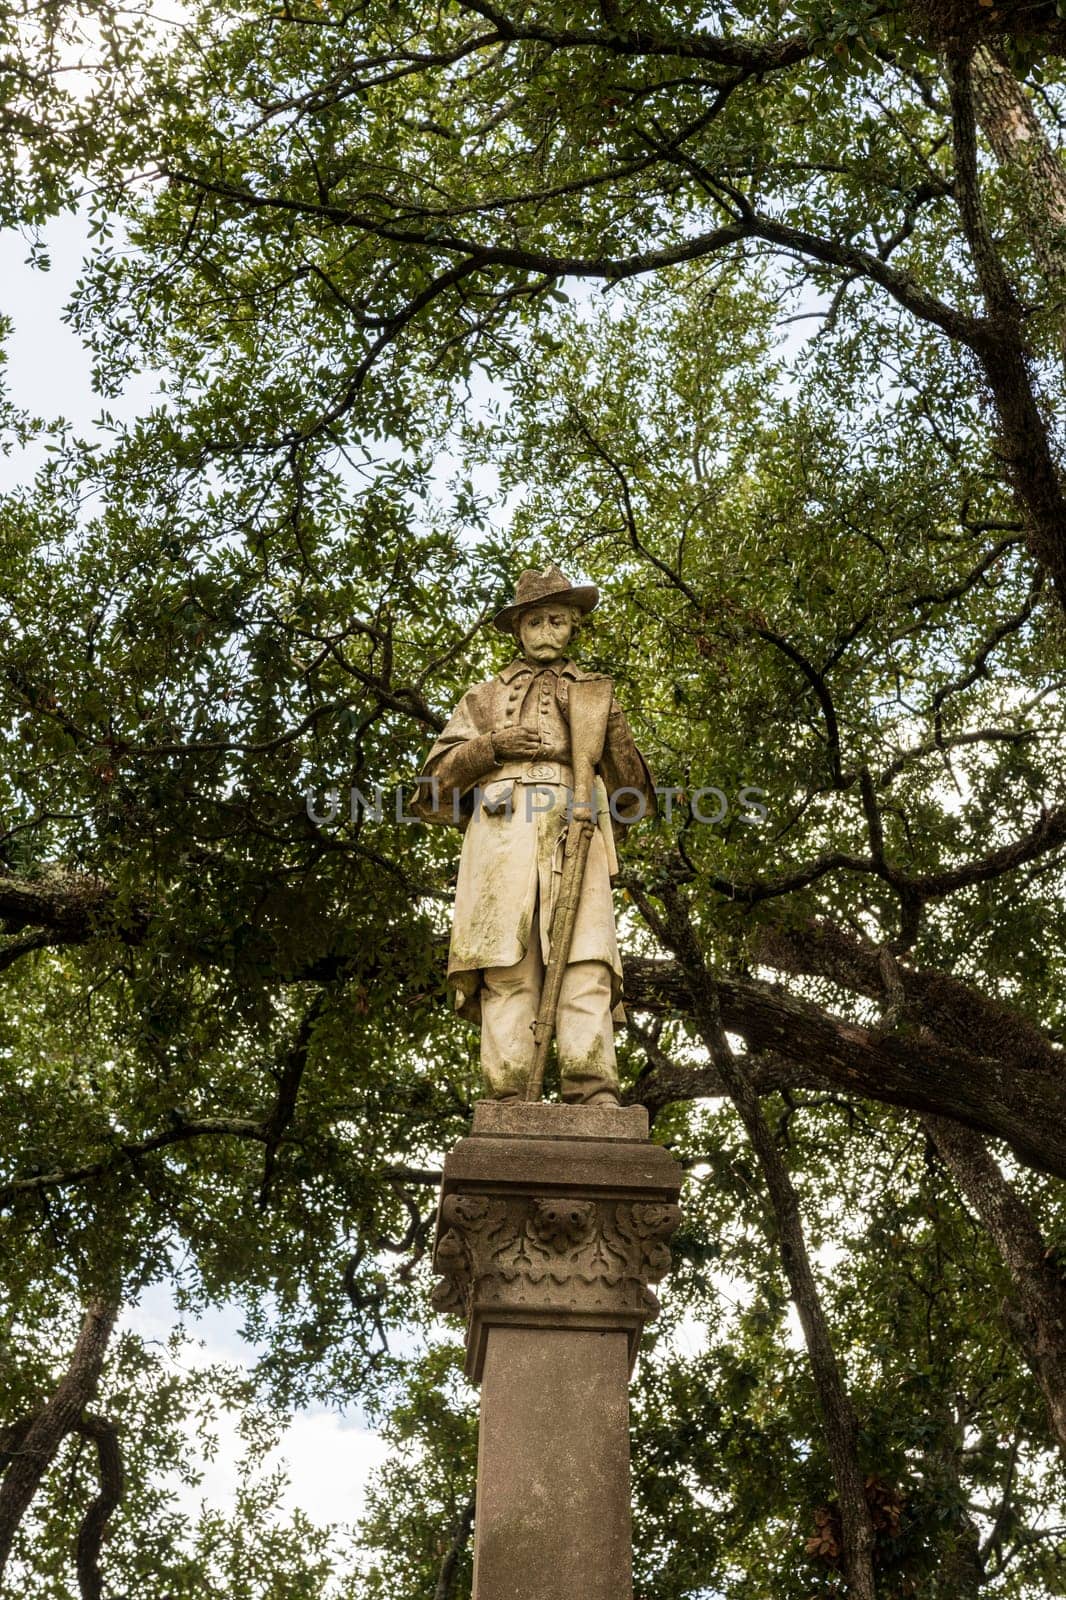 Front view of statue confederate soldier surrendering in Natchez by steheap